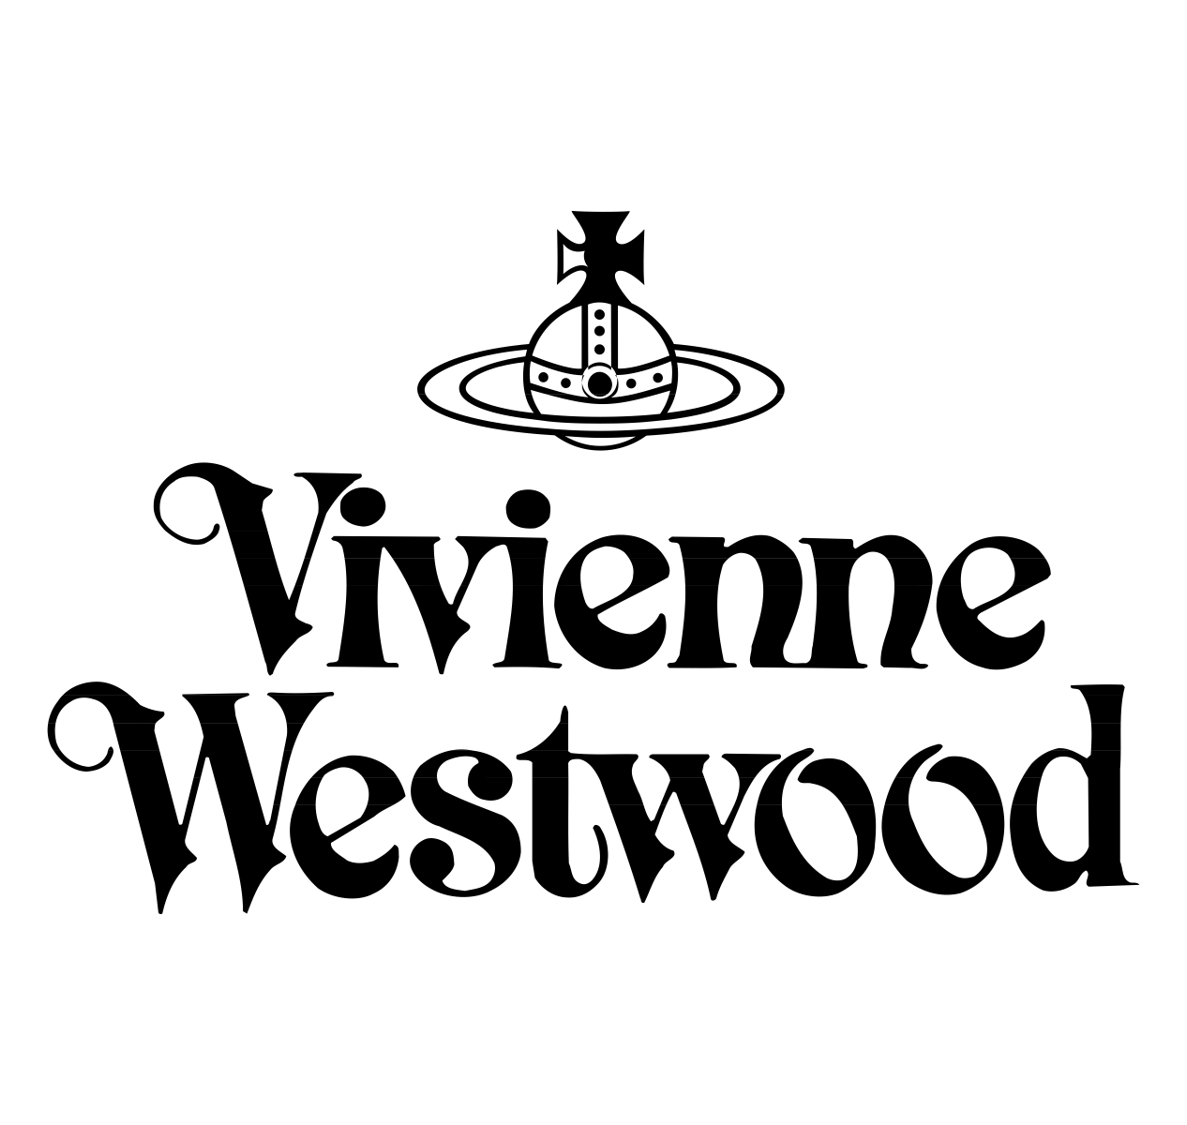 Vivienne Westwood Selects Mapp To  Deliver Customer Personalization